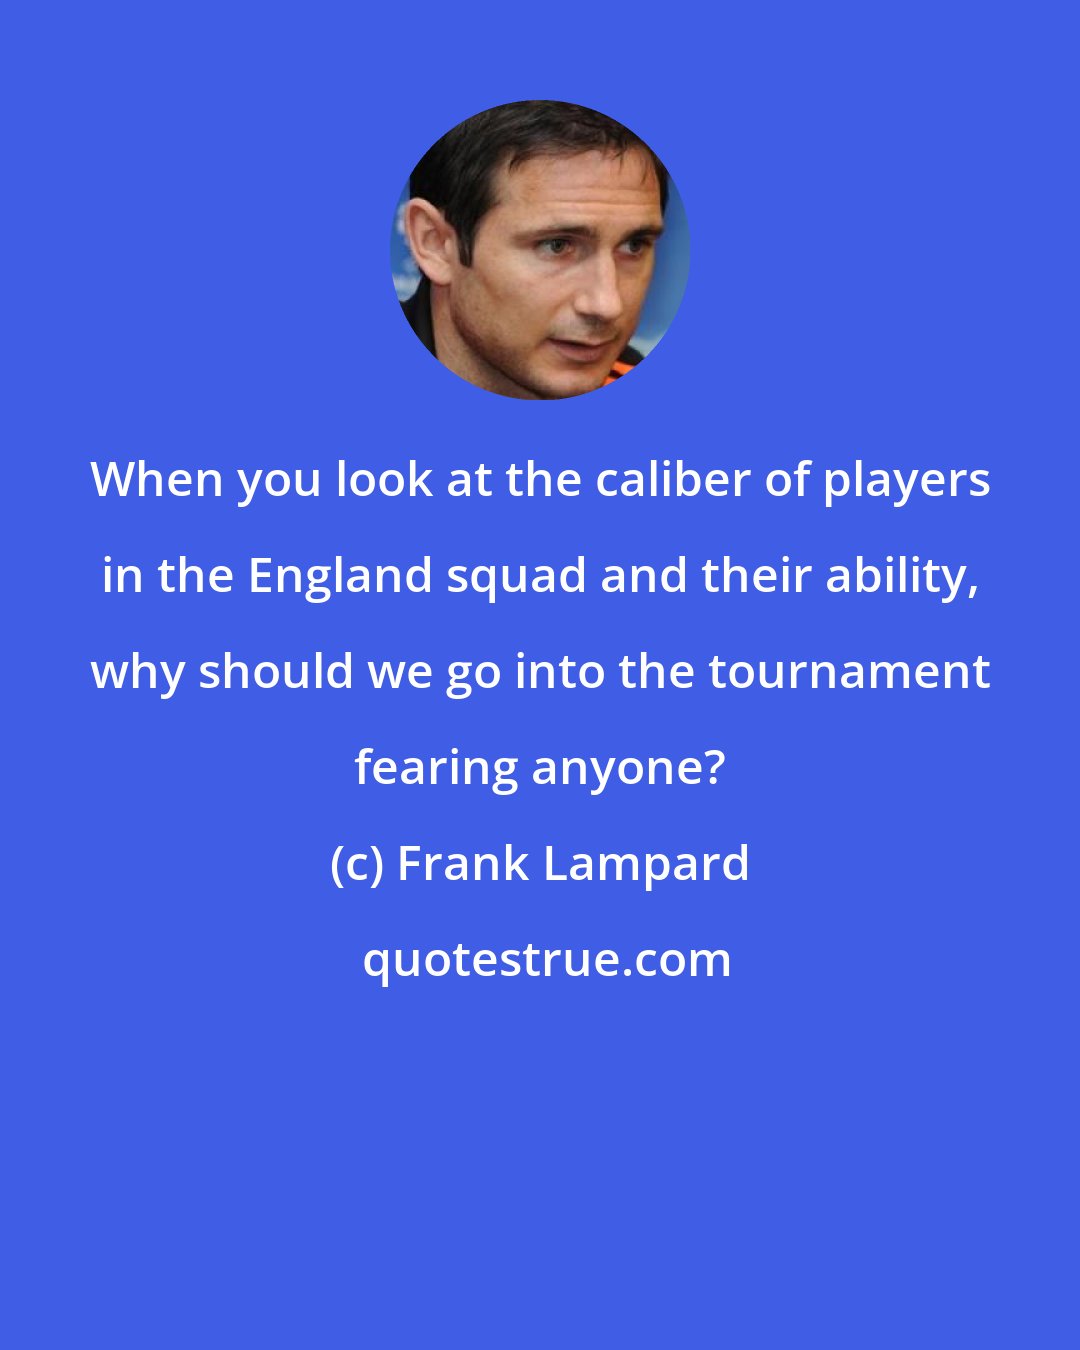 Frank Lampard: When you look at the caliber of players in the England squad and their ability, why should we go into the tournament fearing anyone?